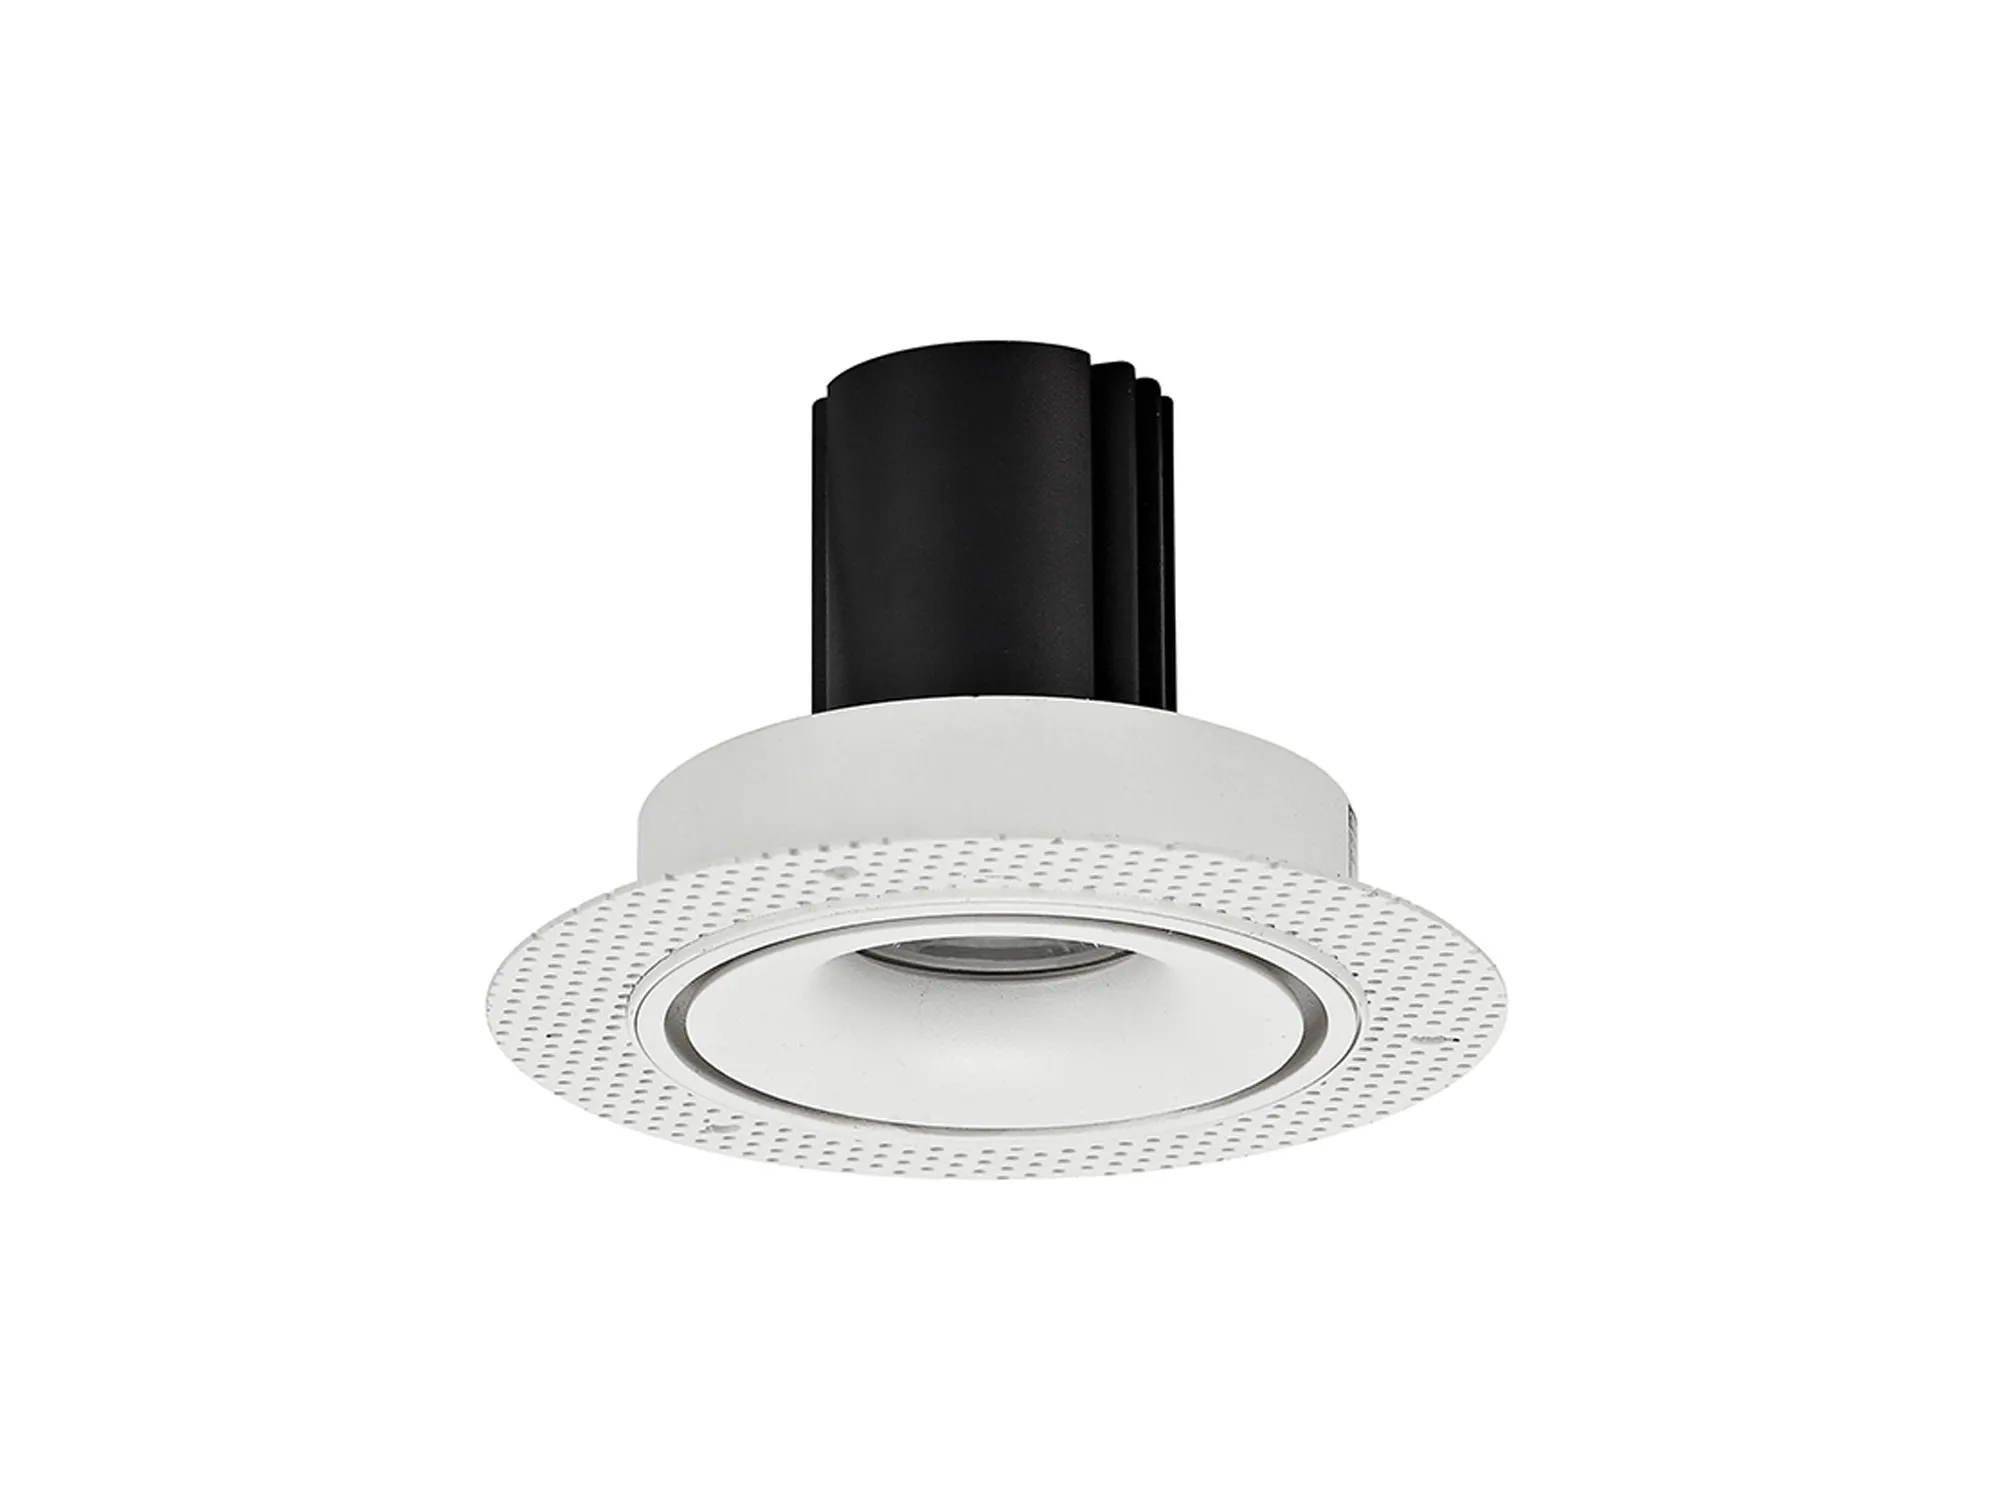 DM202165  Bolor T 12 Tridonic Powered 12W 3000K 1200lm 12° CRI>90 LED Engine White/White Trimless Fixed Recessed Spotlight; IP20